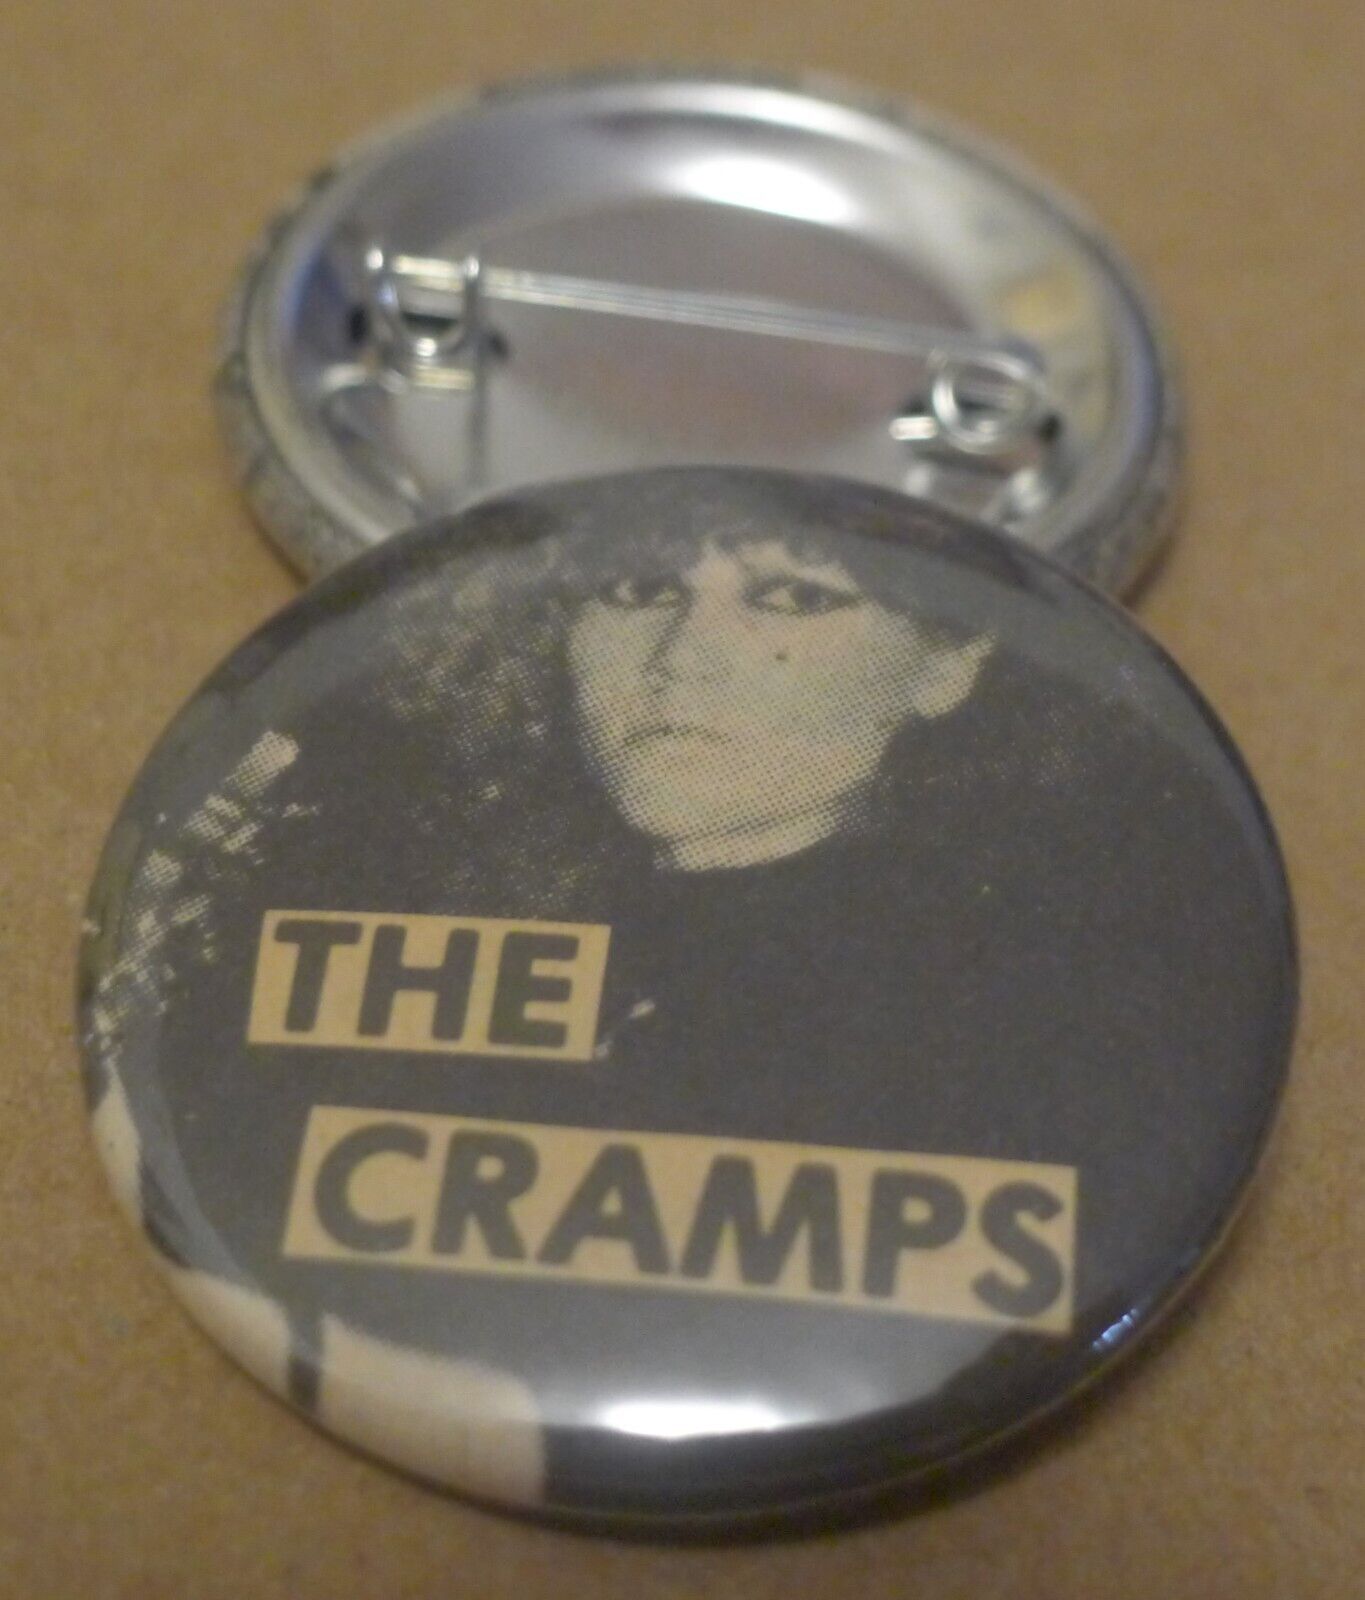 THE CRAMPS band PINBACK button PIN badge POISON IVY guitar PUNK psychobilly